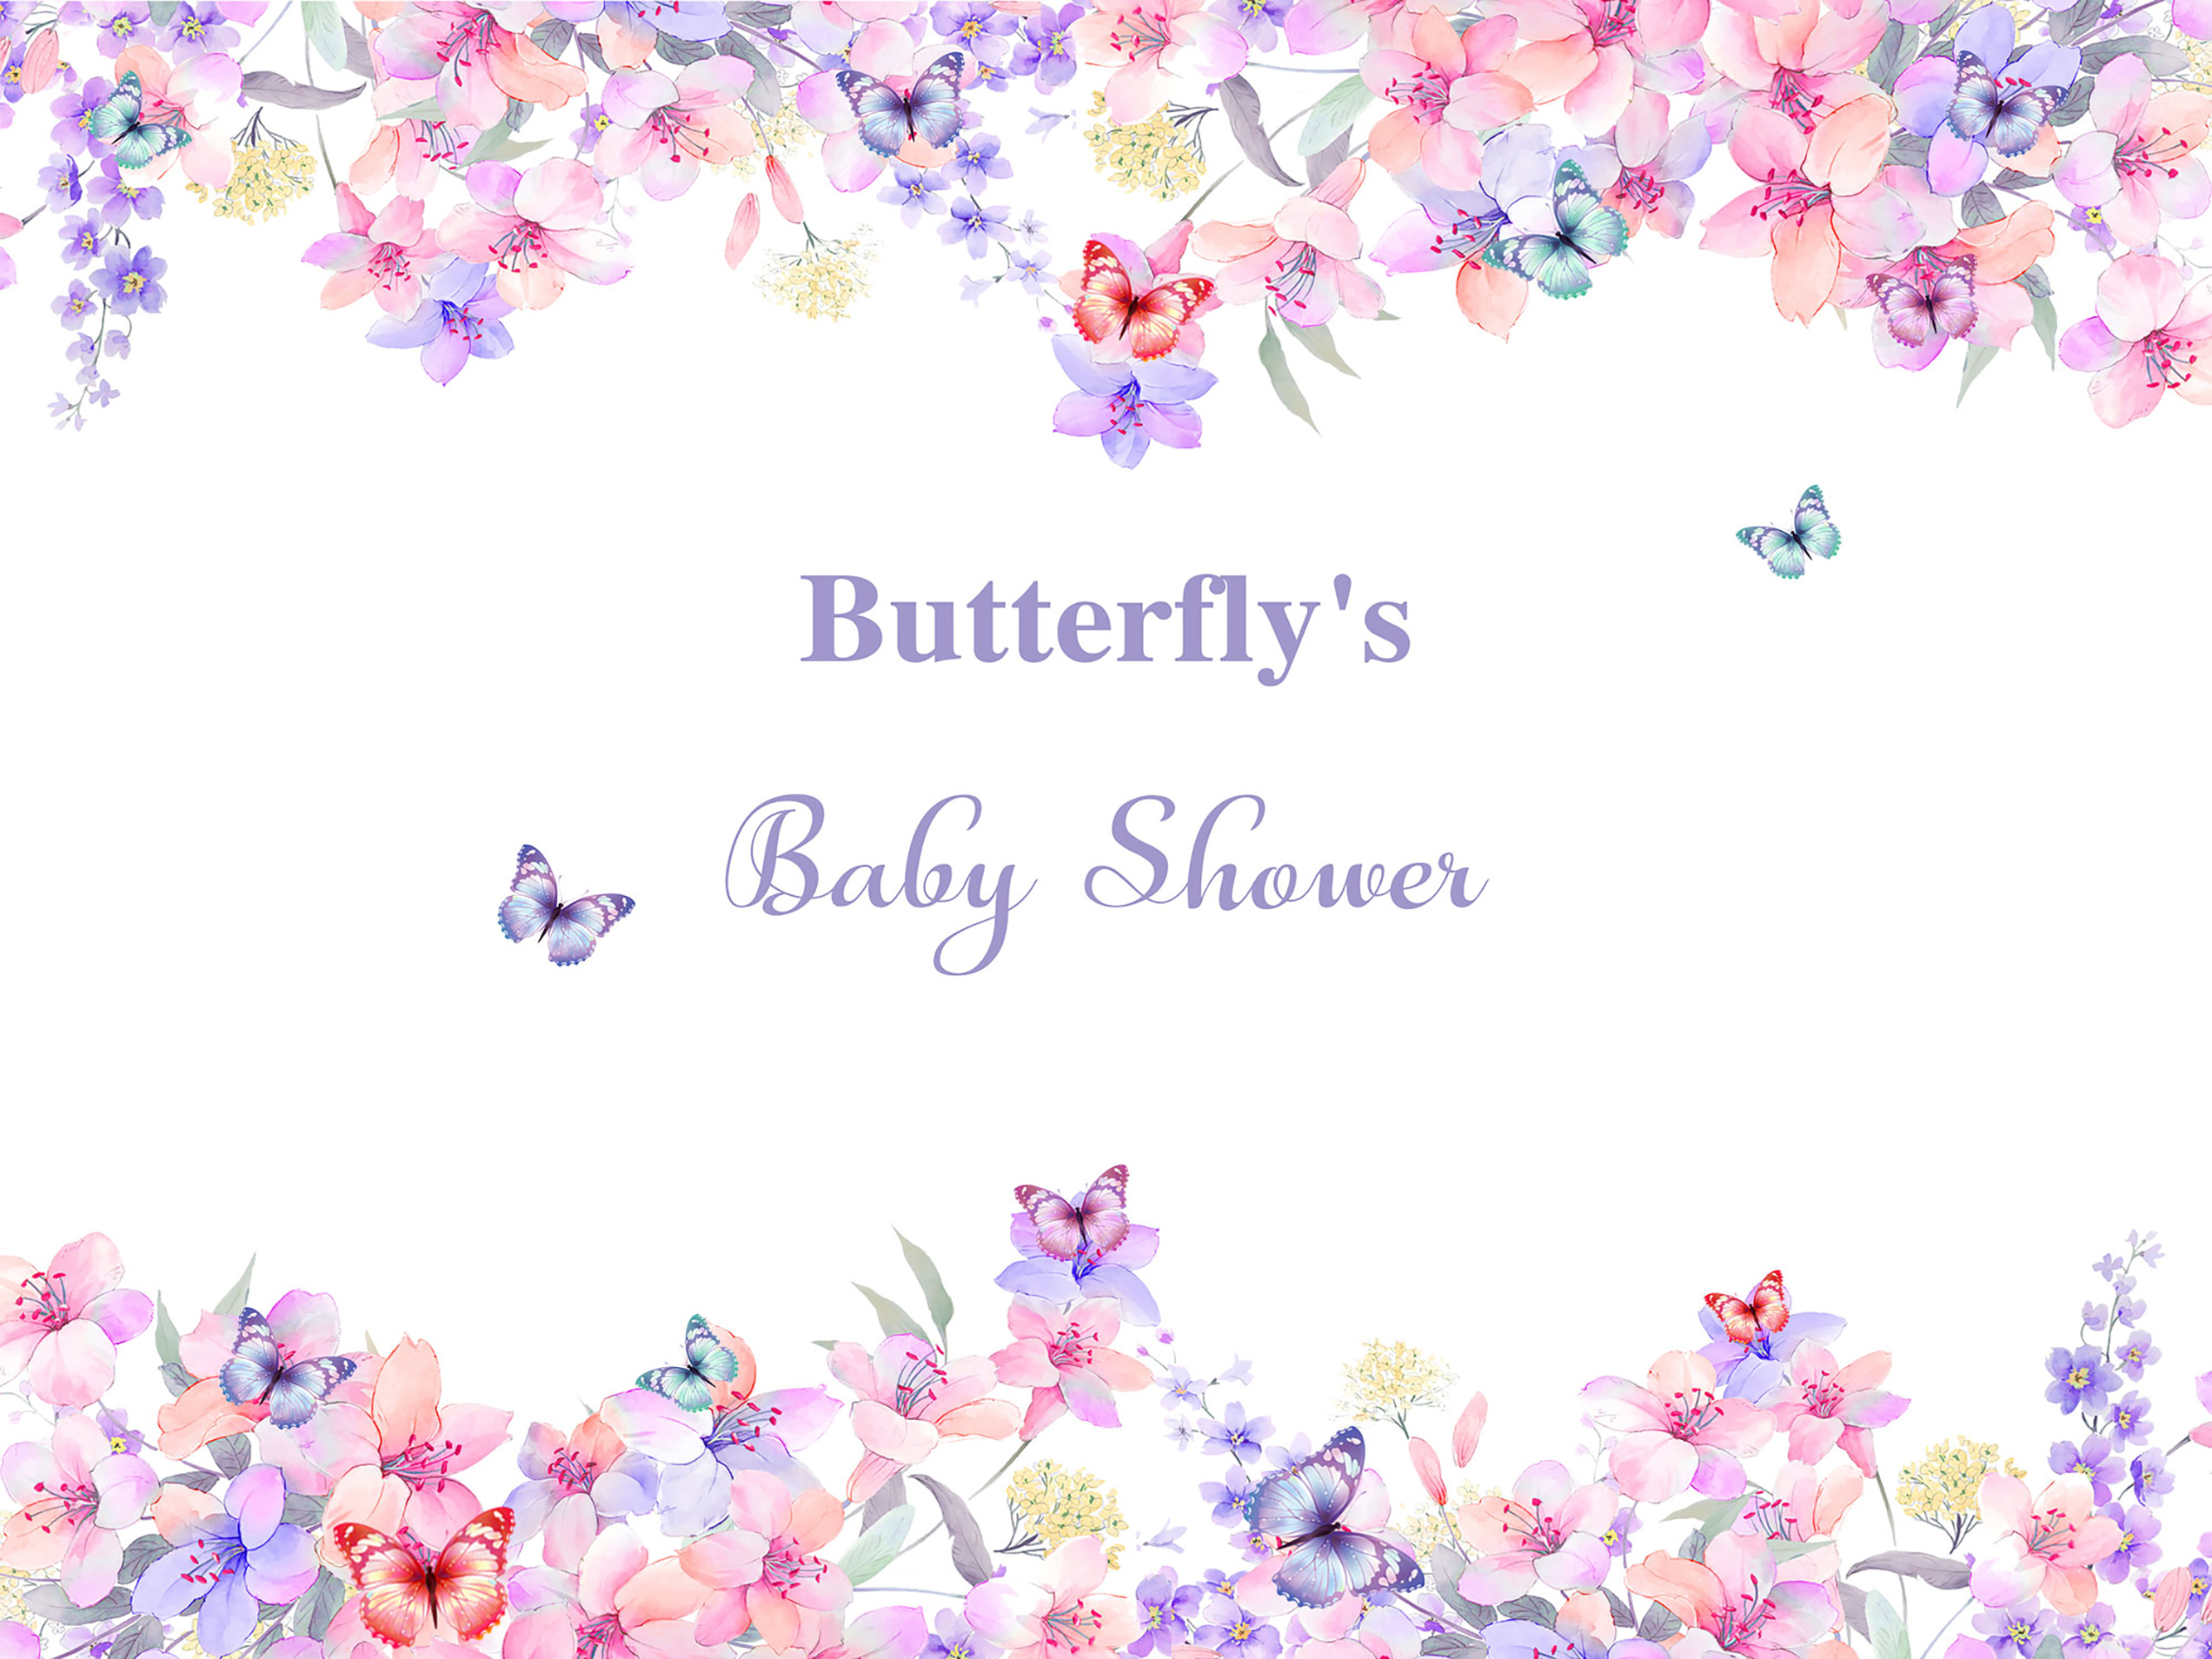 

Butterflies Baby Shower Birthday Banner Photography Backdrops Colorful Watercolor Flowers Vinyl Photo Booth Backgrounds for Children Studio